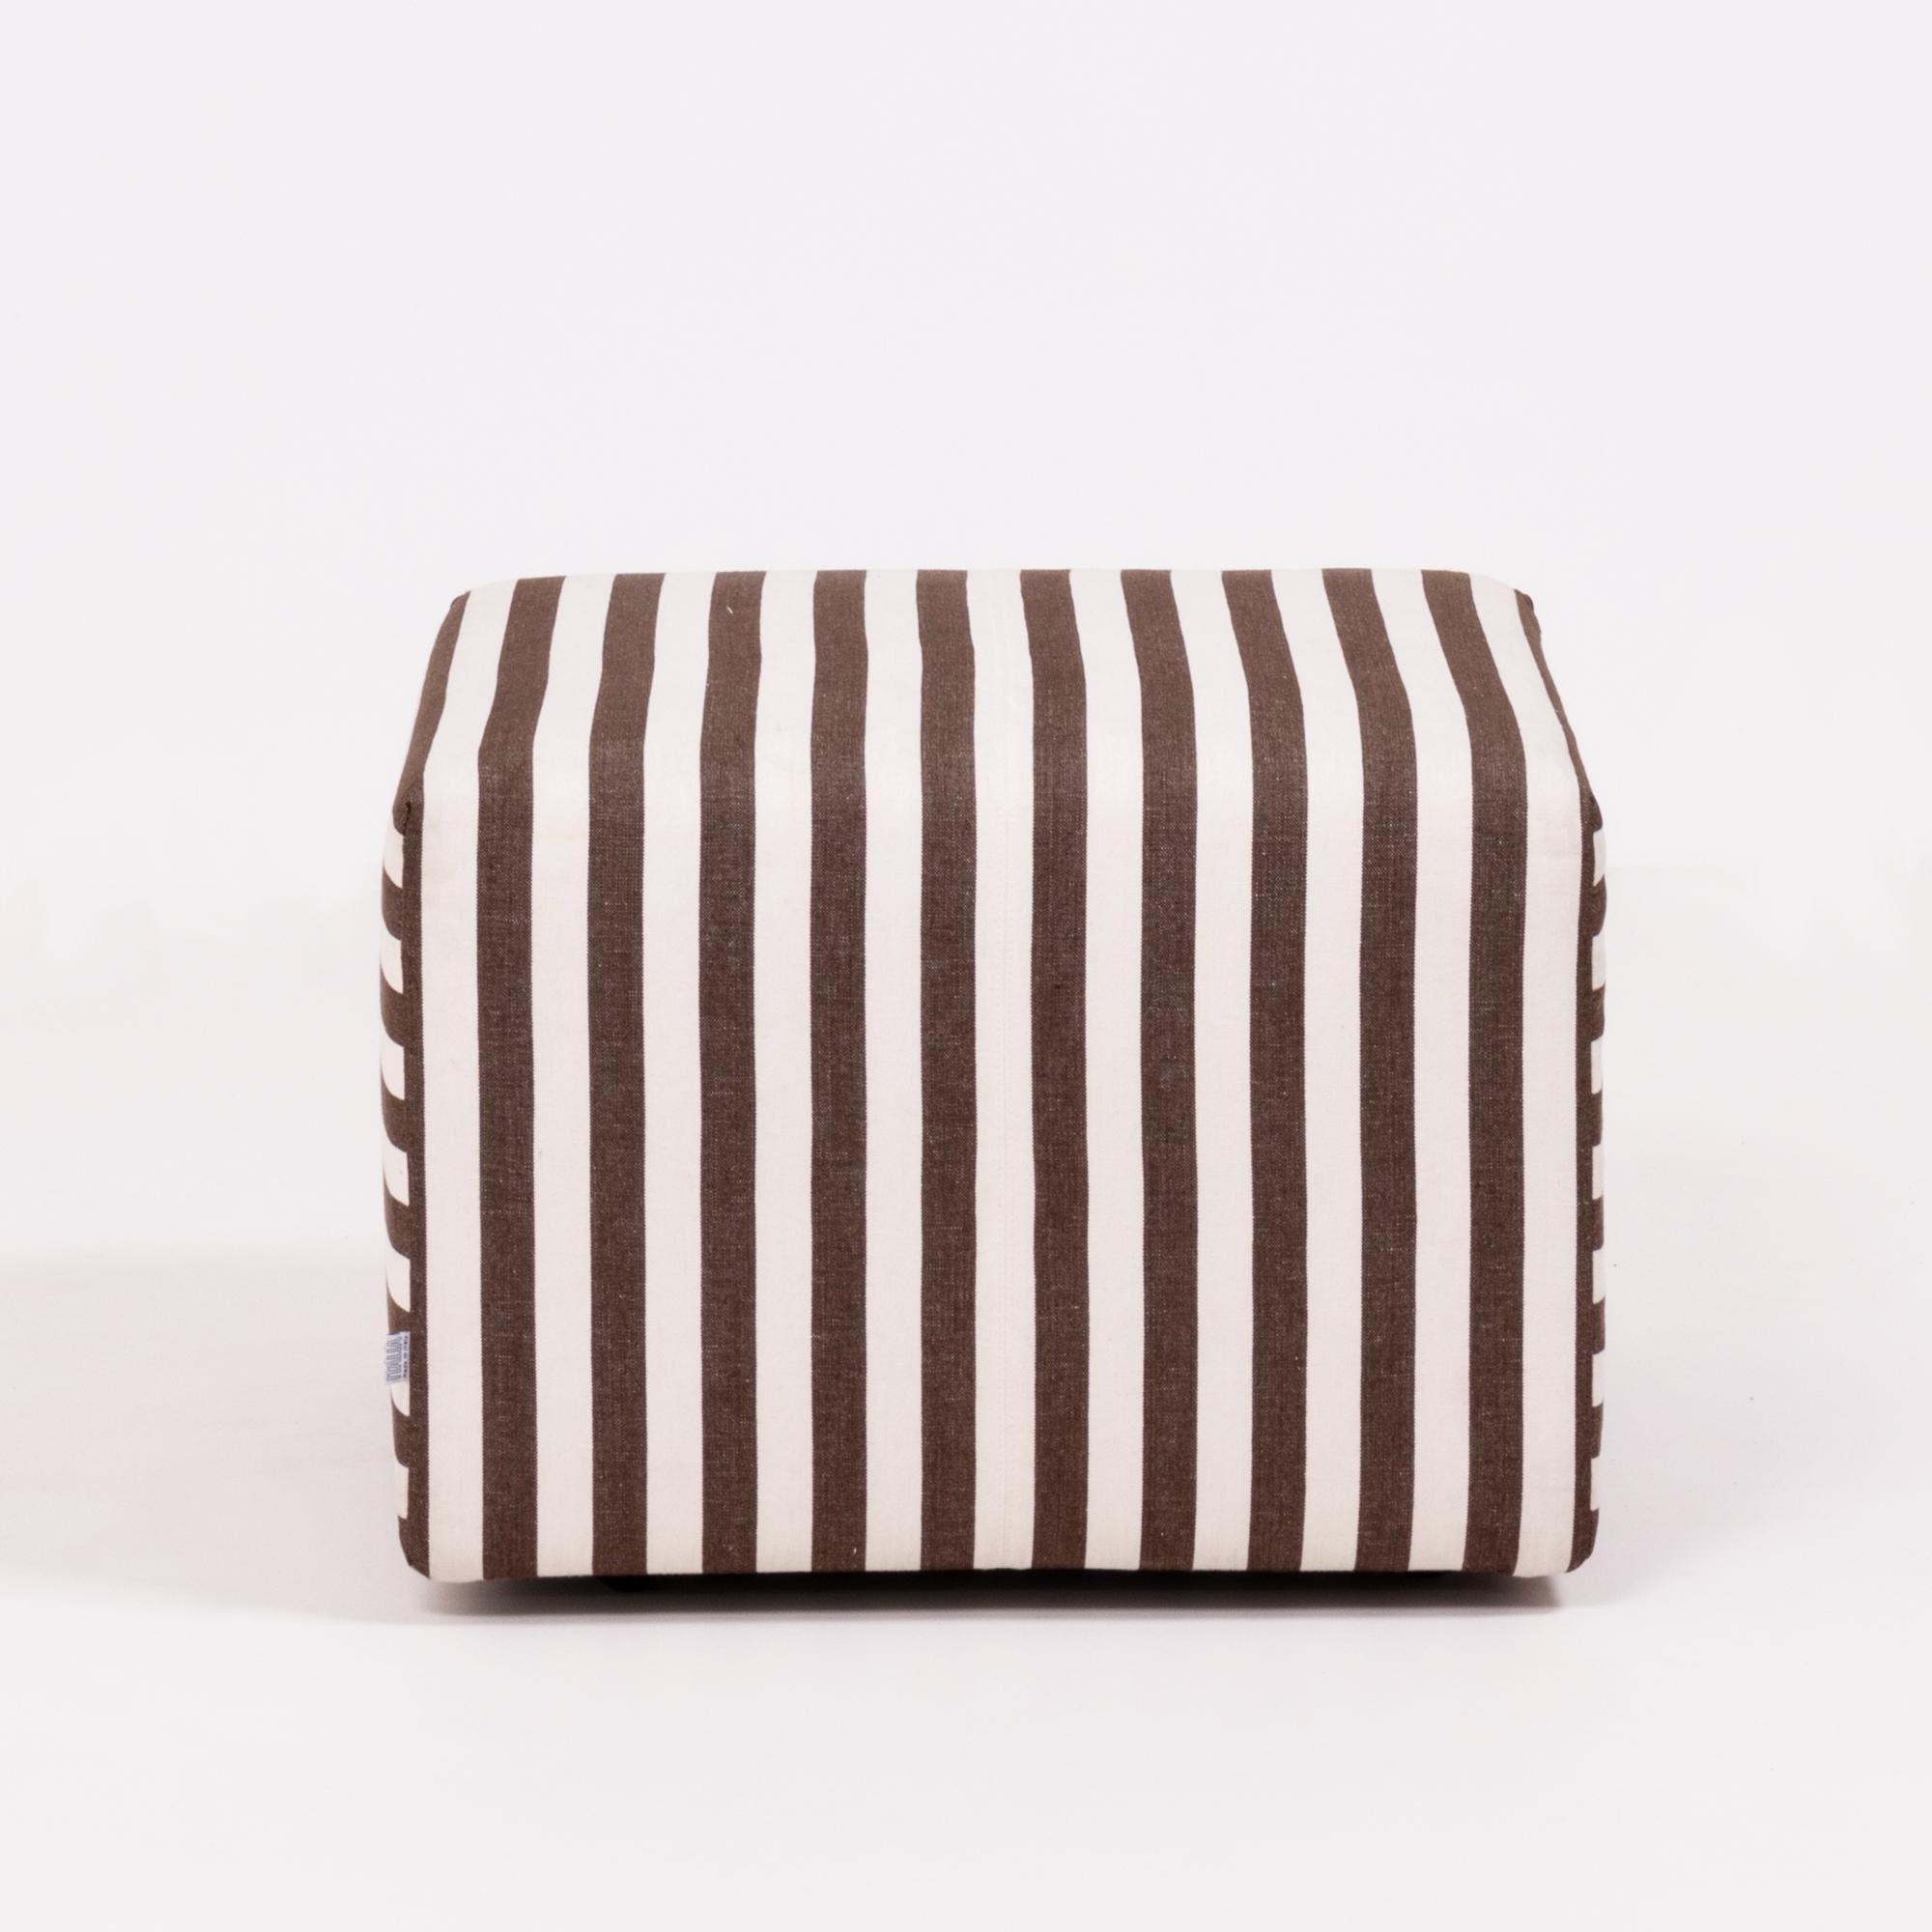 Originally designed in 2003 by Antonio Citterio for B&B Italia, the P60 ottoman is simple yet bold.

Featuring a cubed shape, the ottoman is upholstered in graphic brown and ivory striped fabric which can be removed with velcro on the underside,